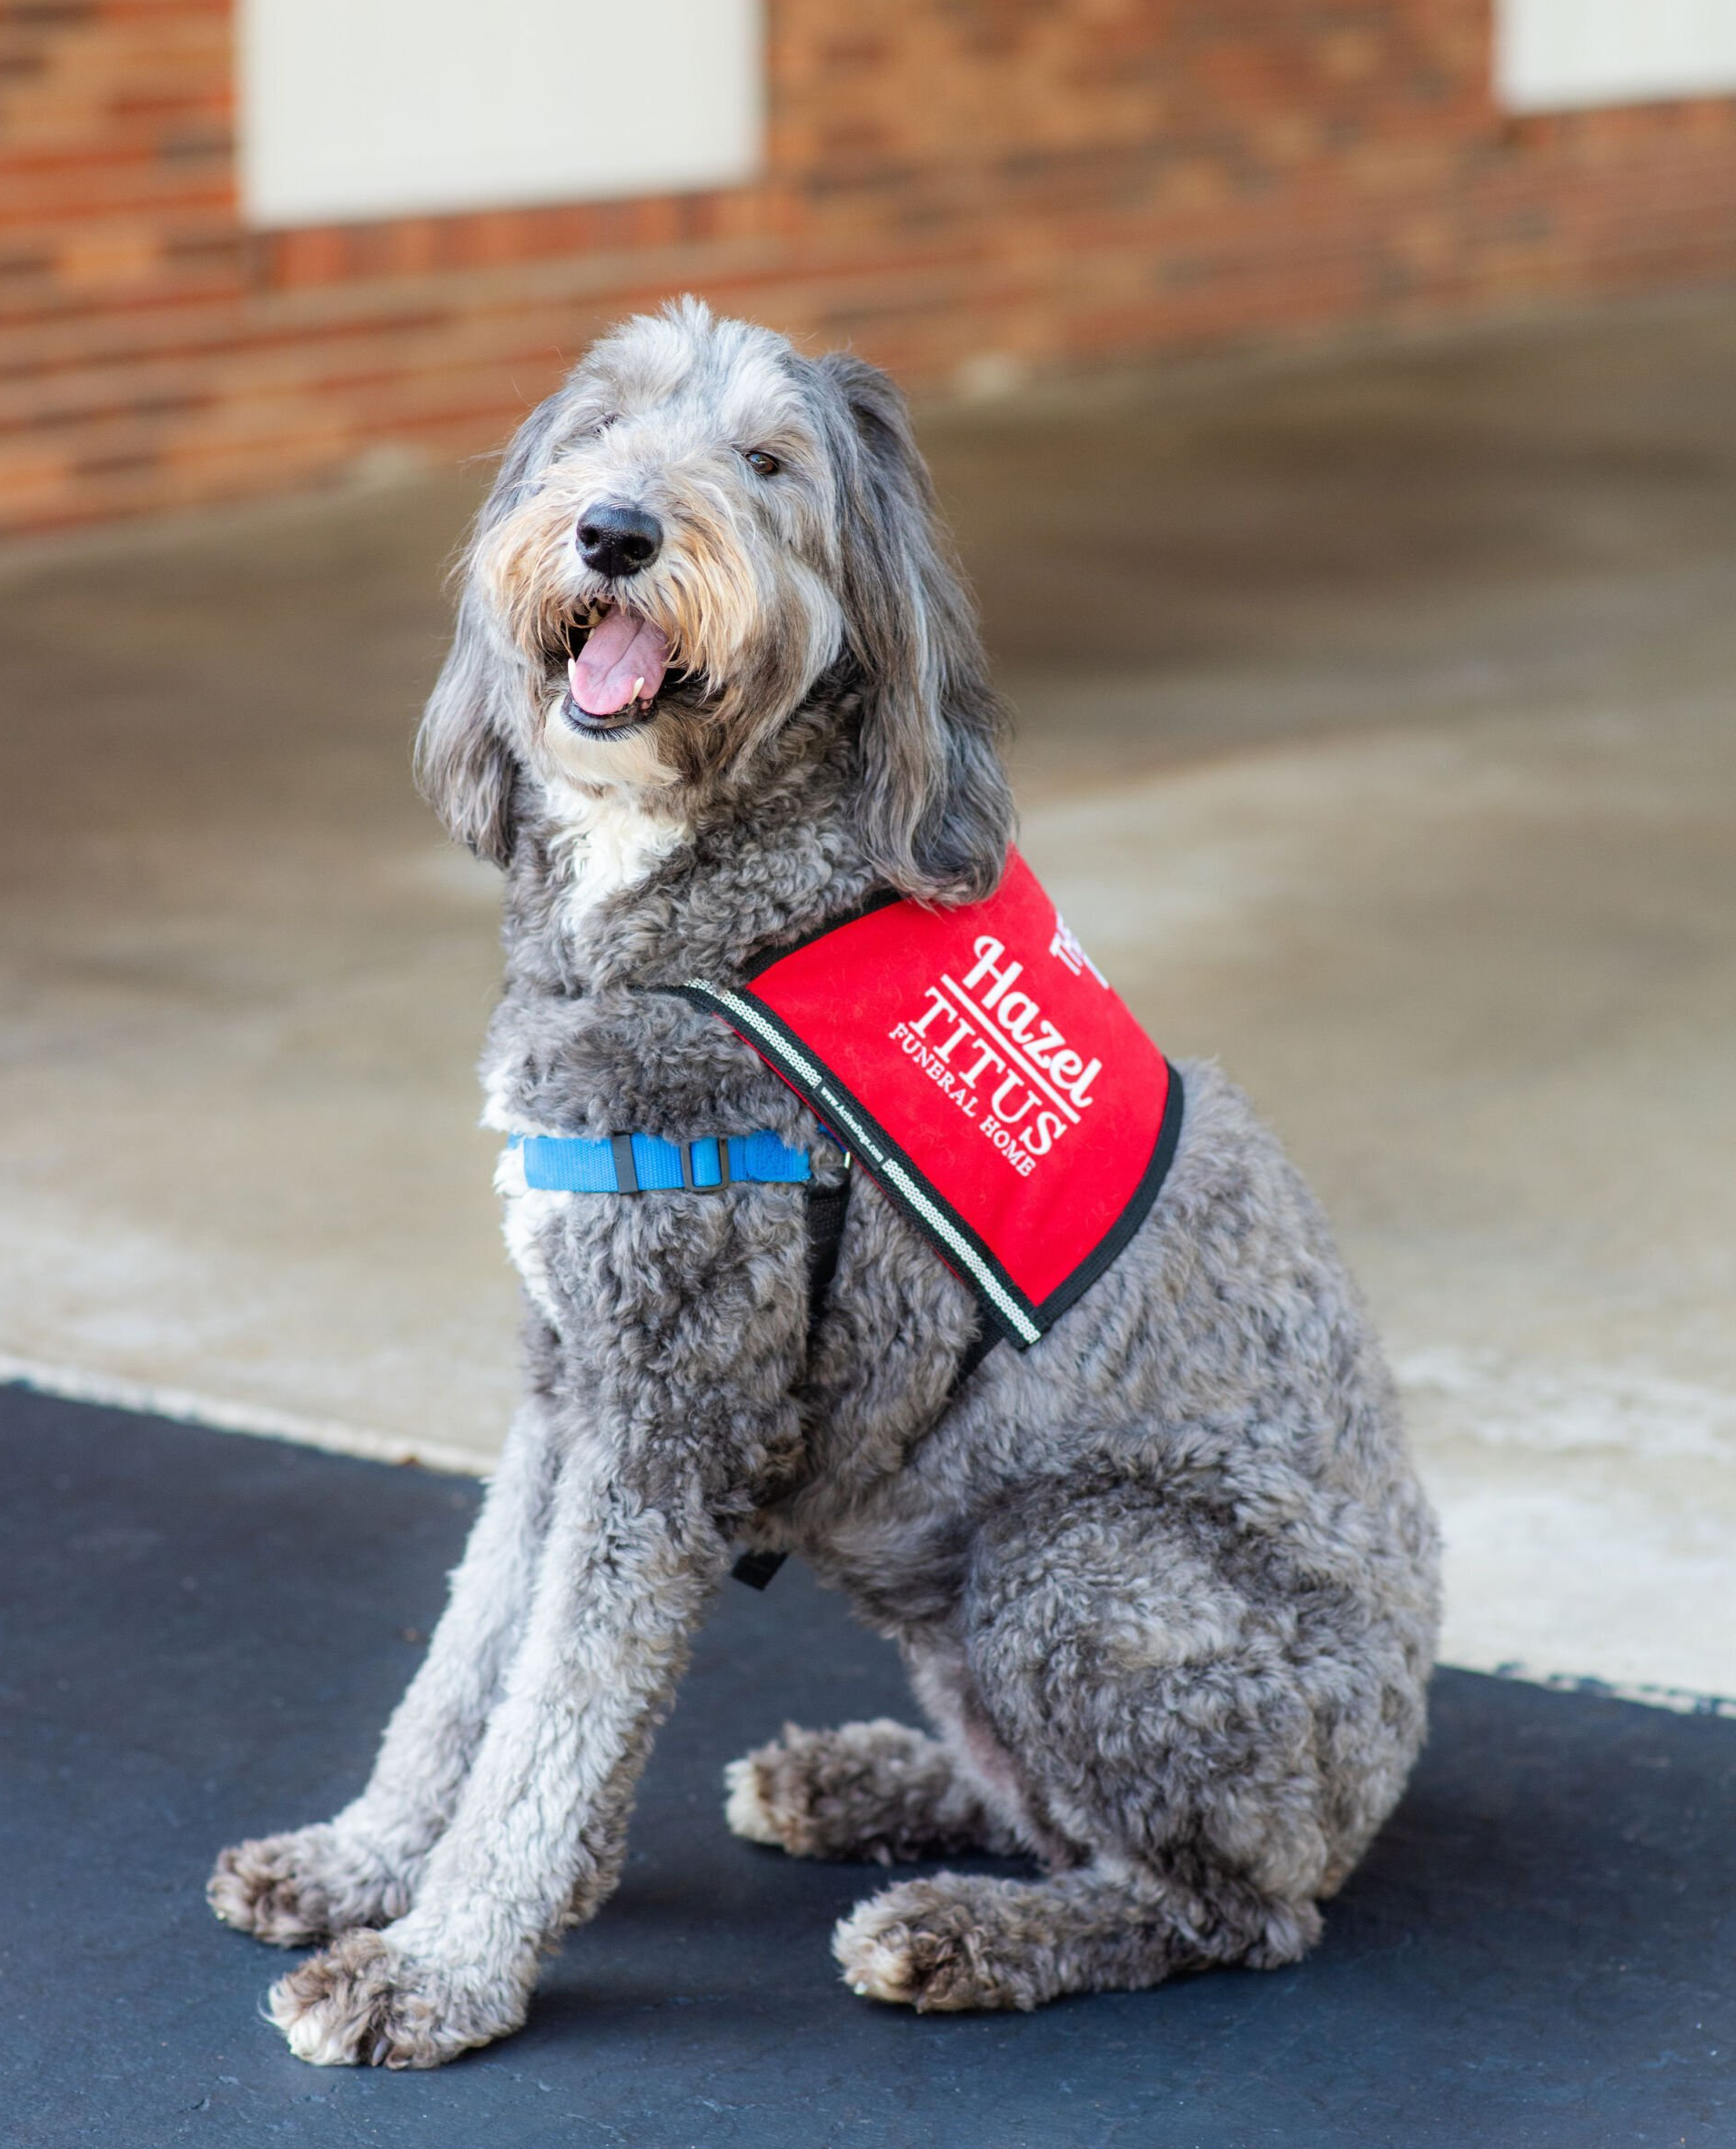 Meet Hazel, a Grief Therapy Dog